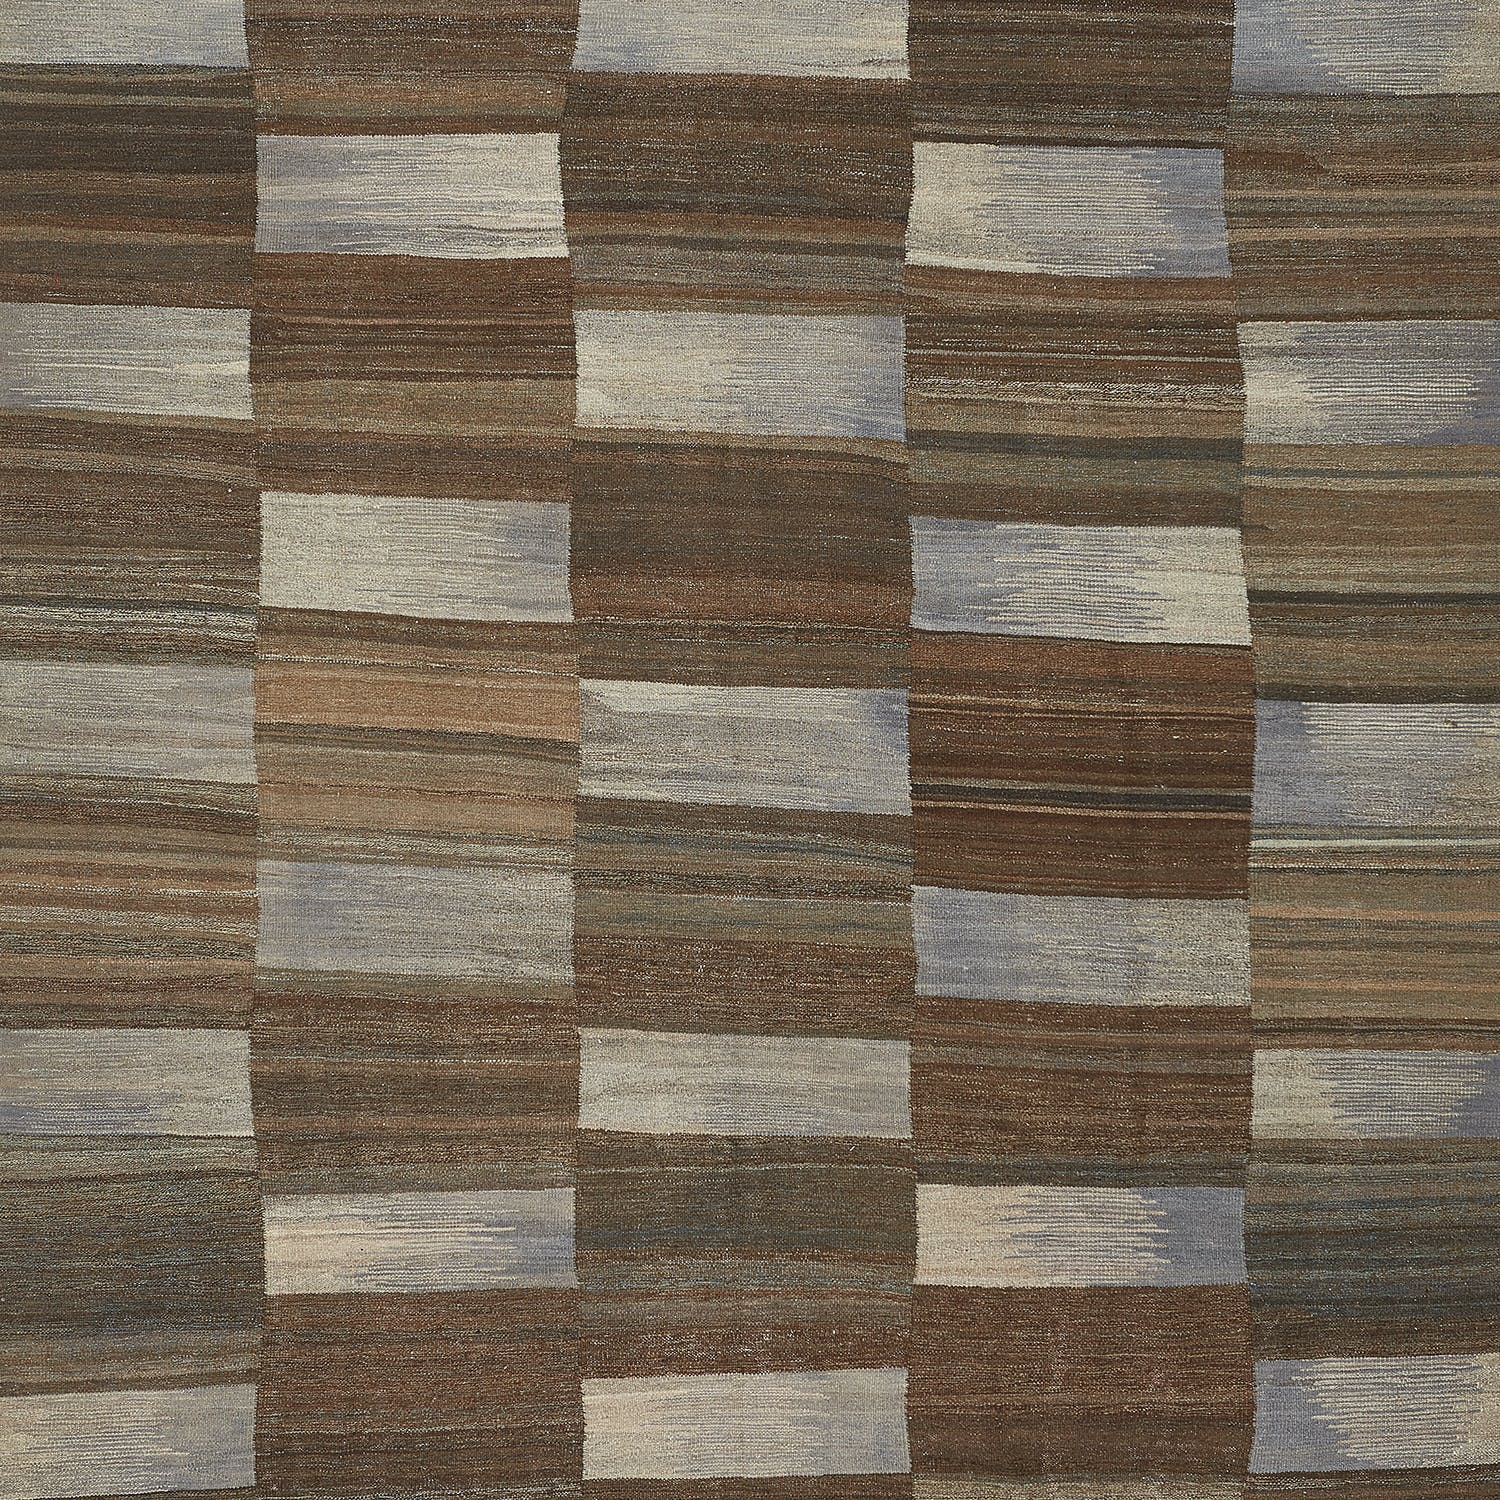 Close-up of coarse woven textile with alternating dark and light stripes.